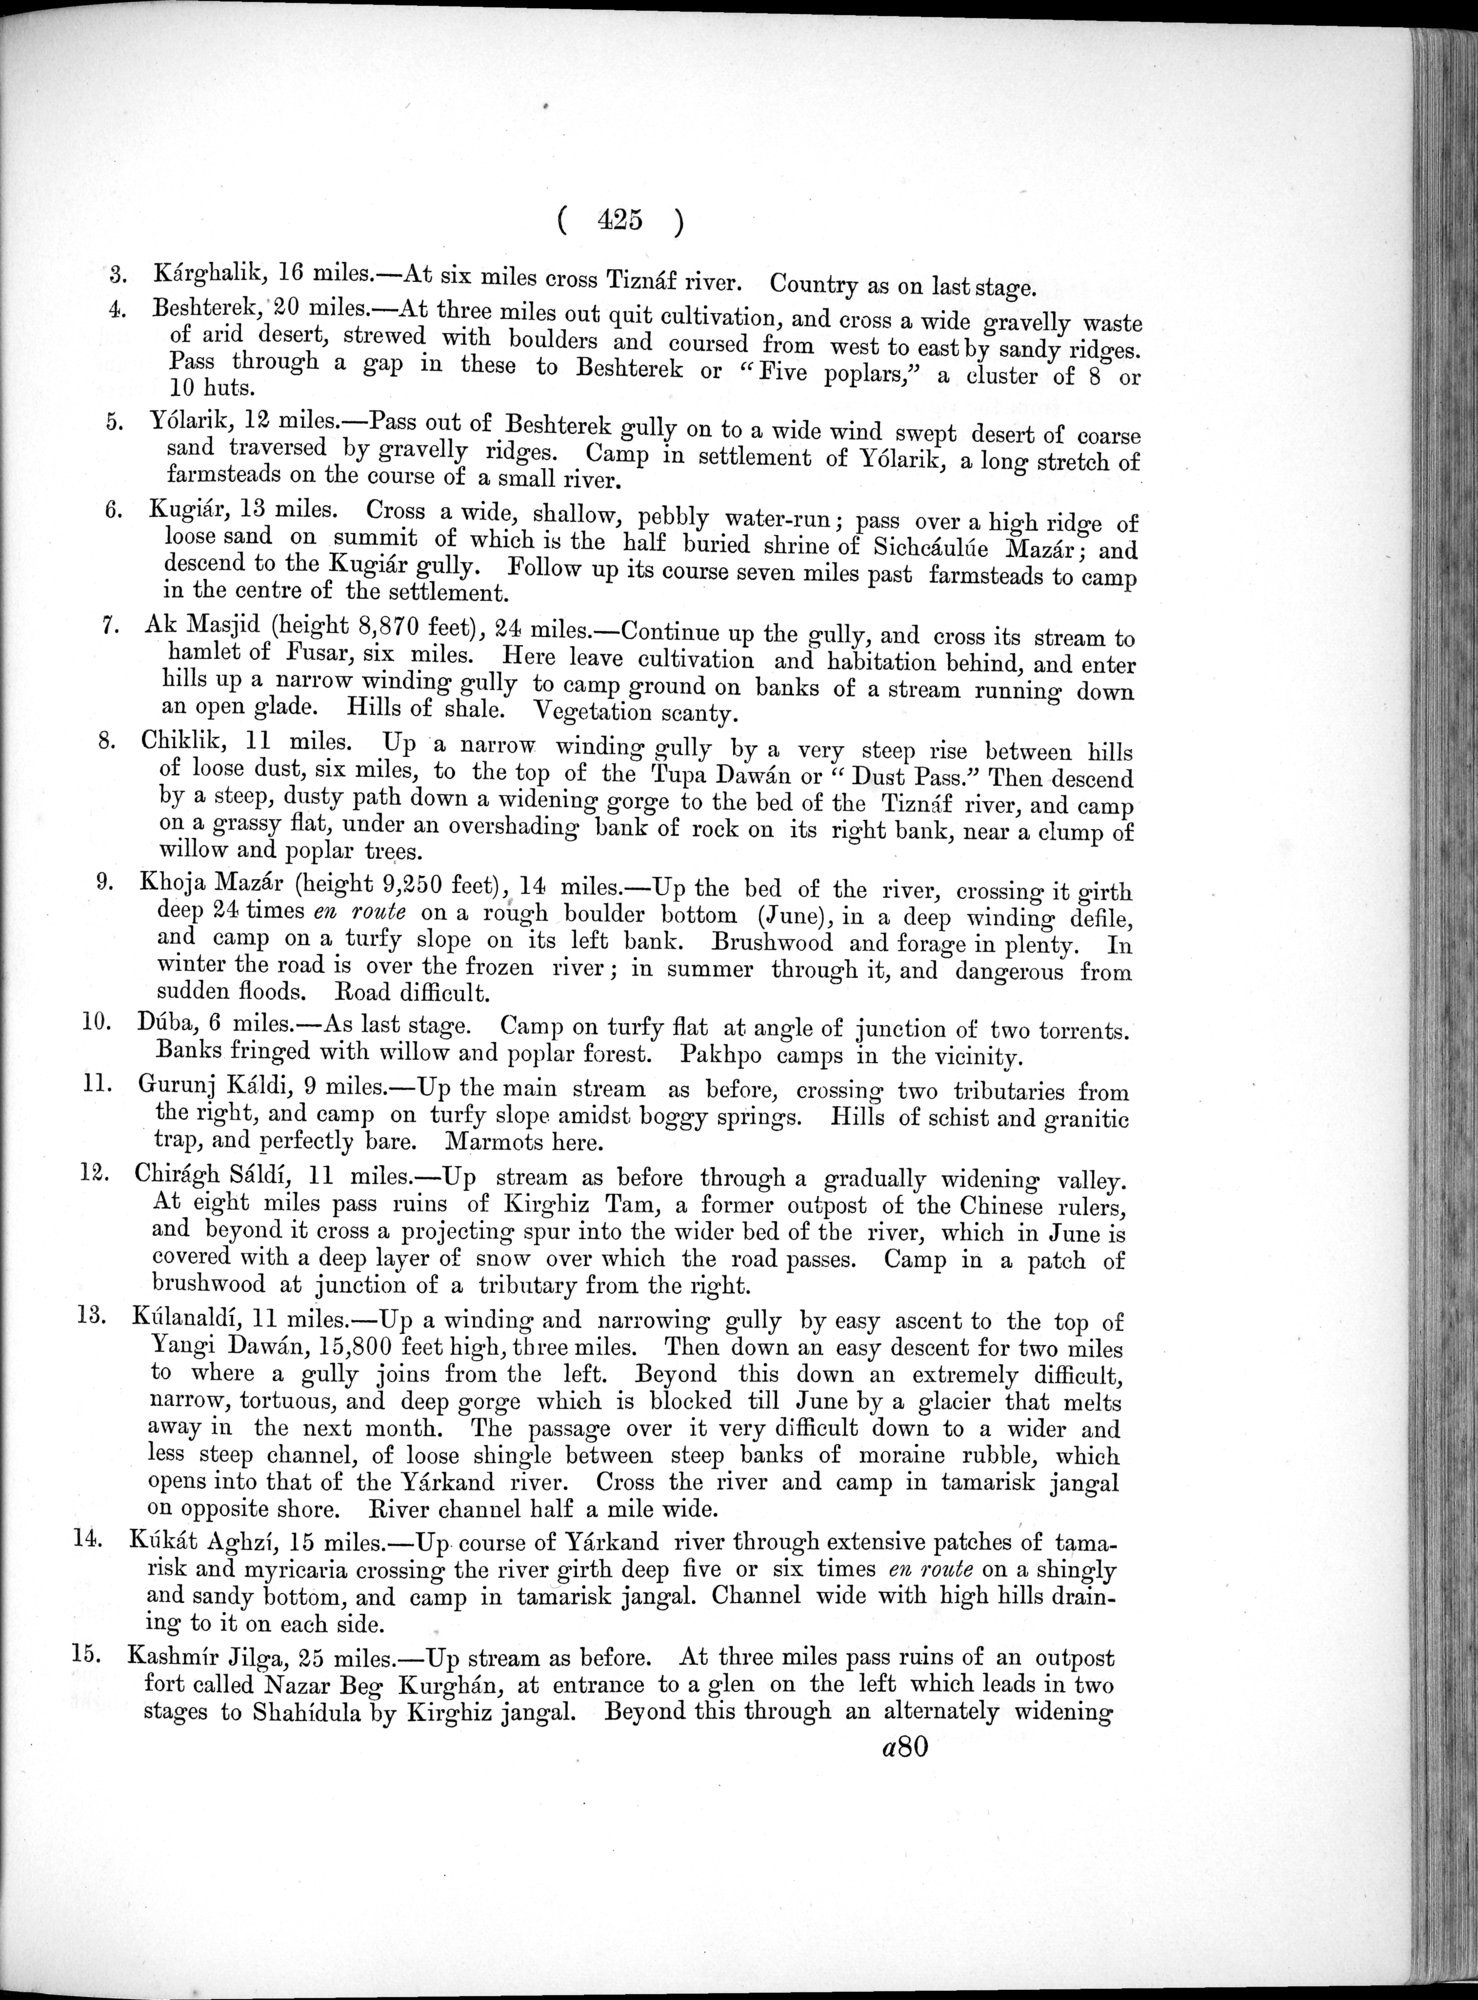 Report of a Mission to Yarkund in 1873 : vol.1 / Page 559 (Grayscale High Resolution Image)